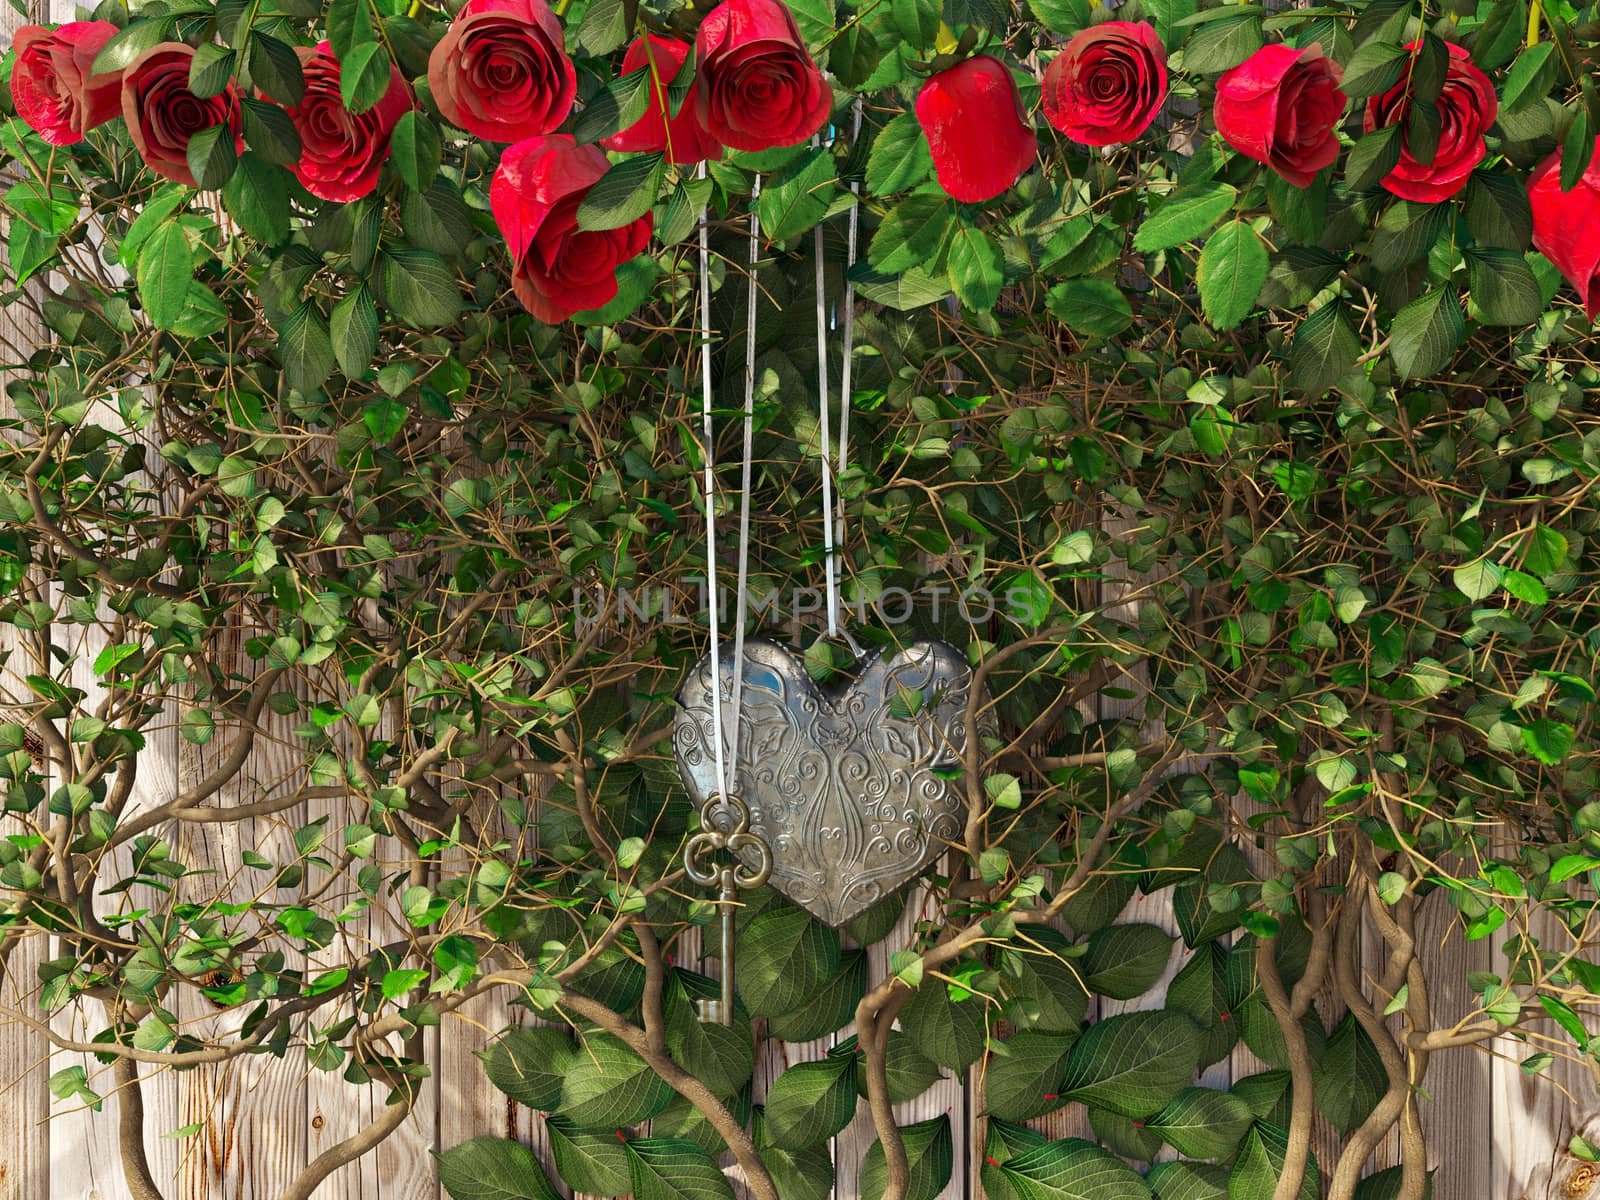 Roses and a heart with key on wooden board,
concept holiday background